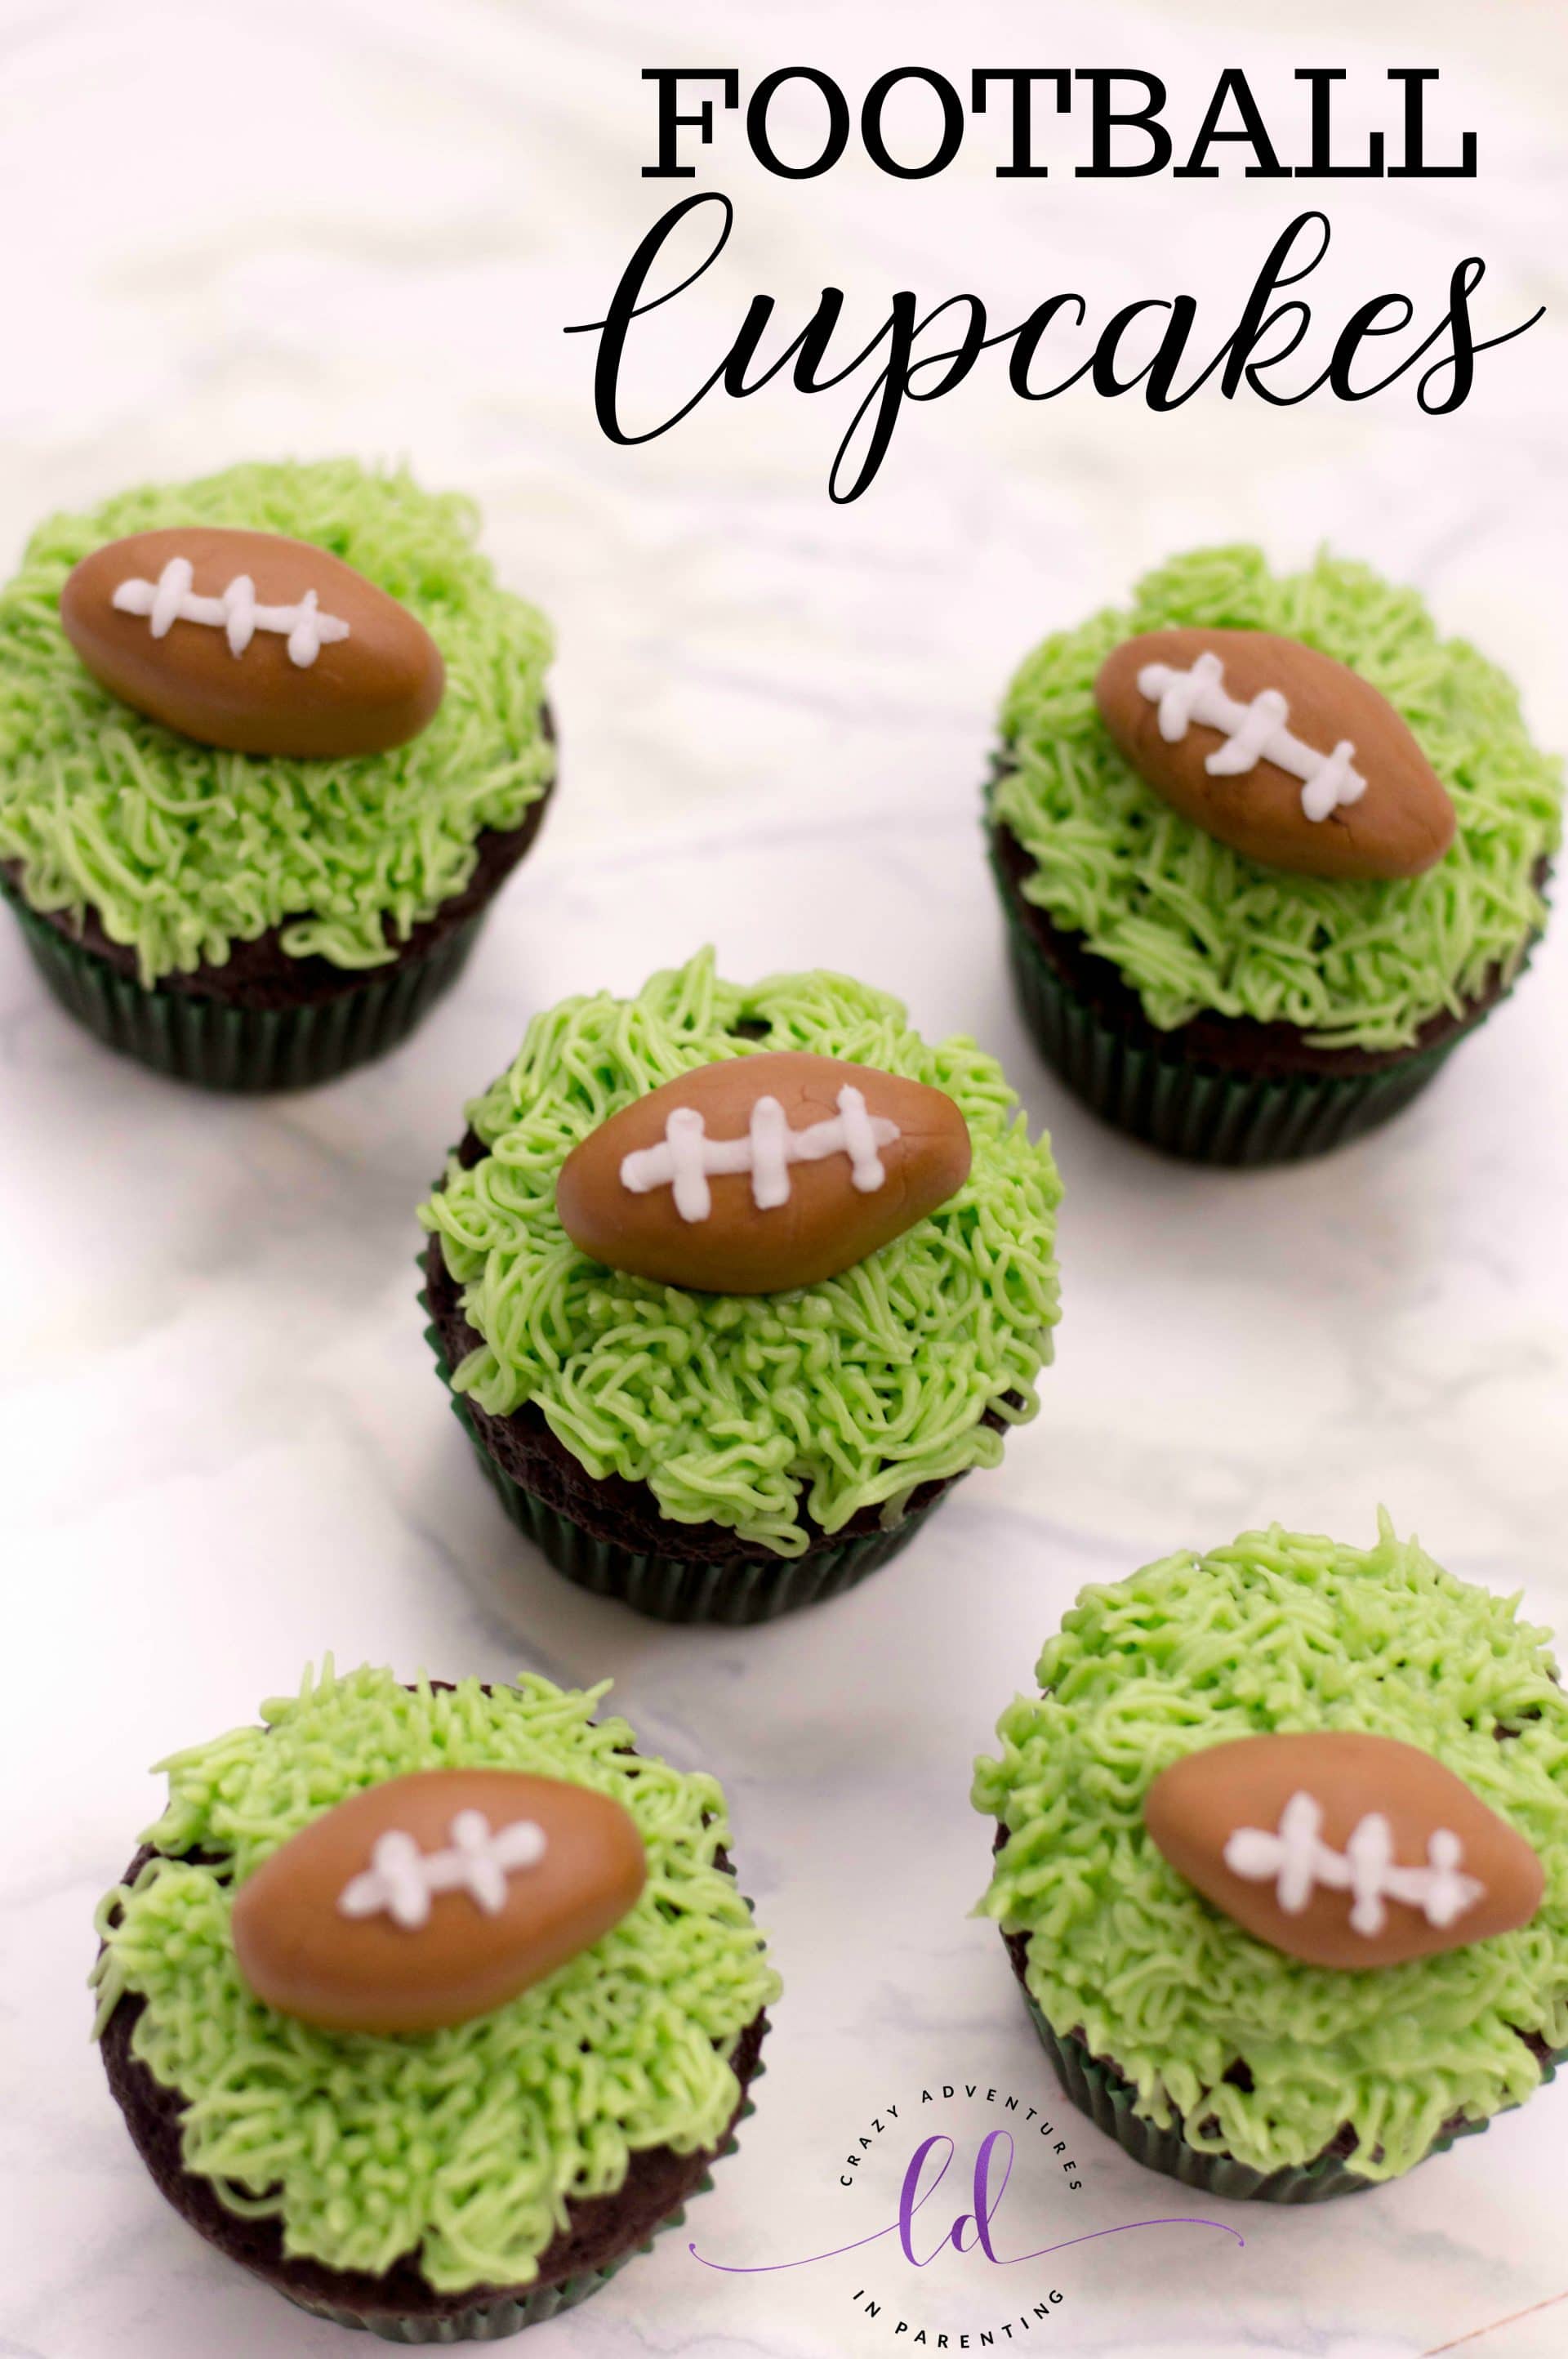 Easy Football Cupcakes Recipe - Perfect for Game Day!